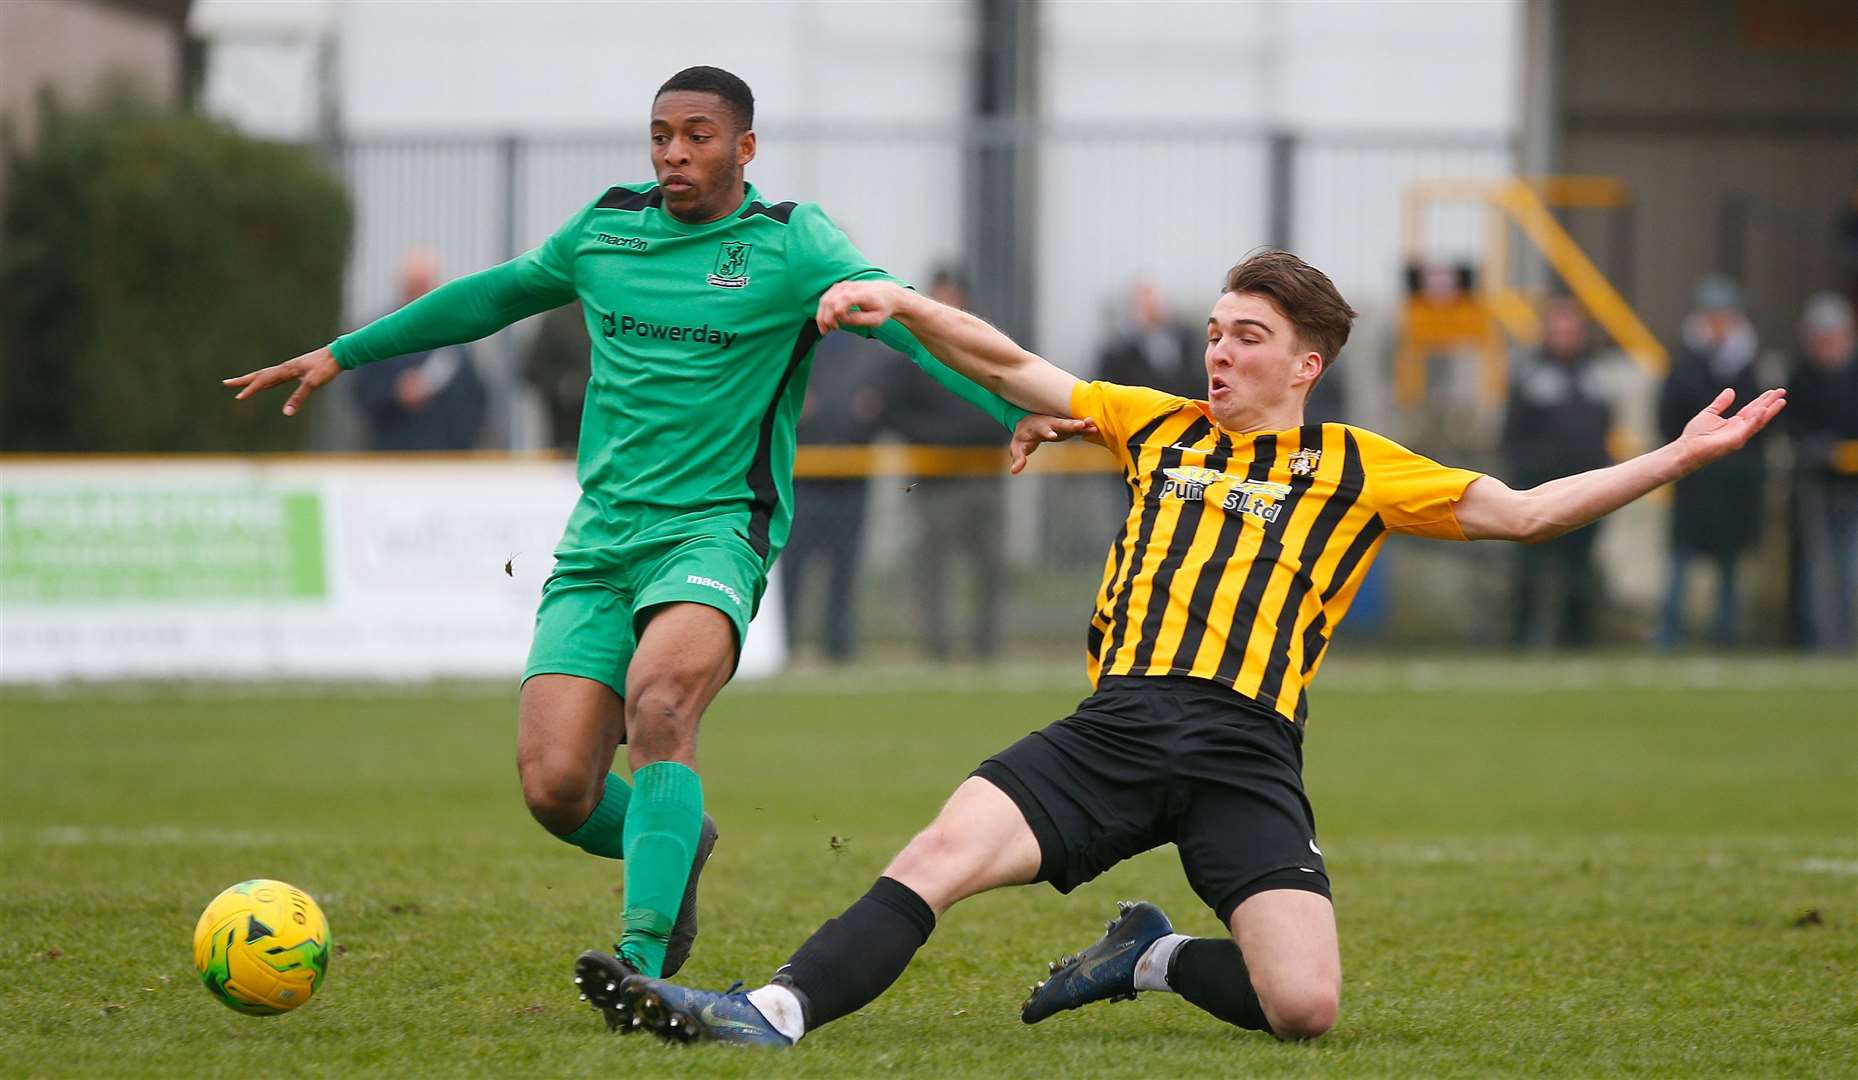 Roman Campbell in the match against Enfield on Saturday. Picture: Andy Jones